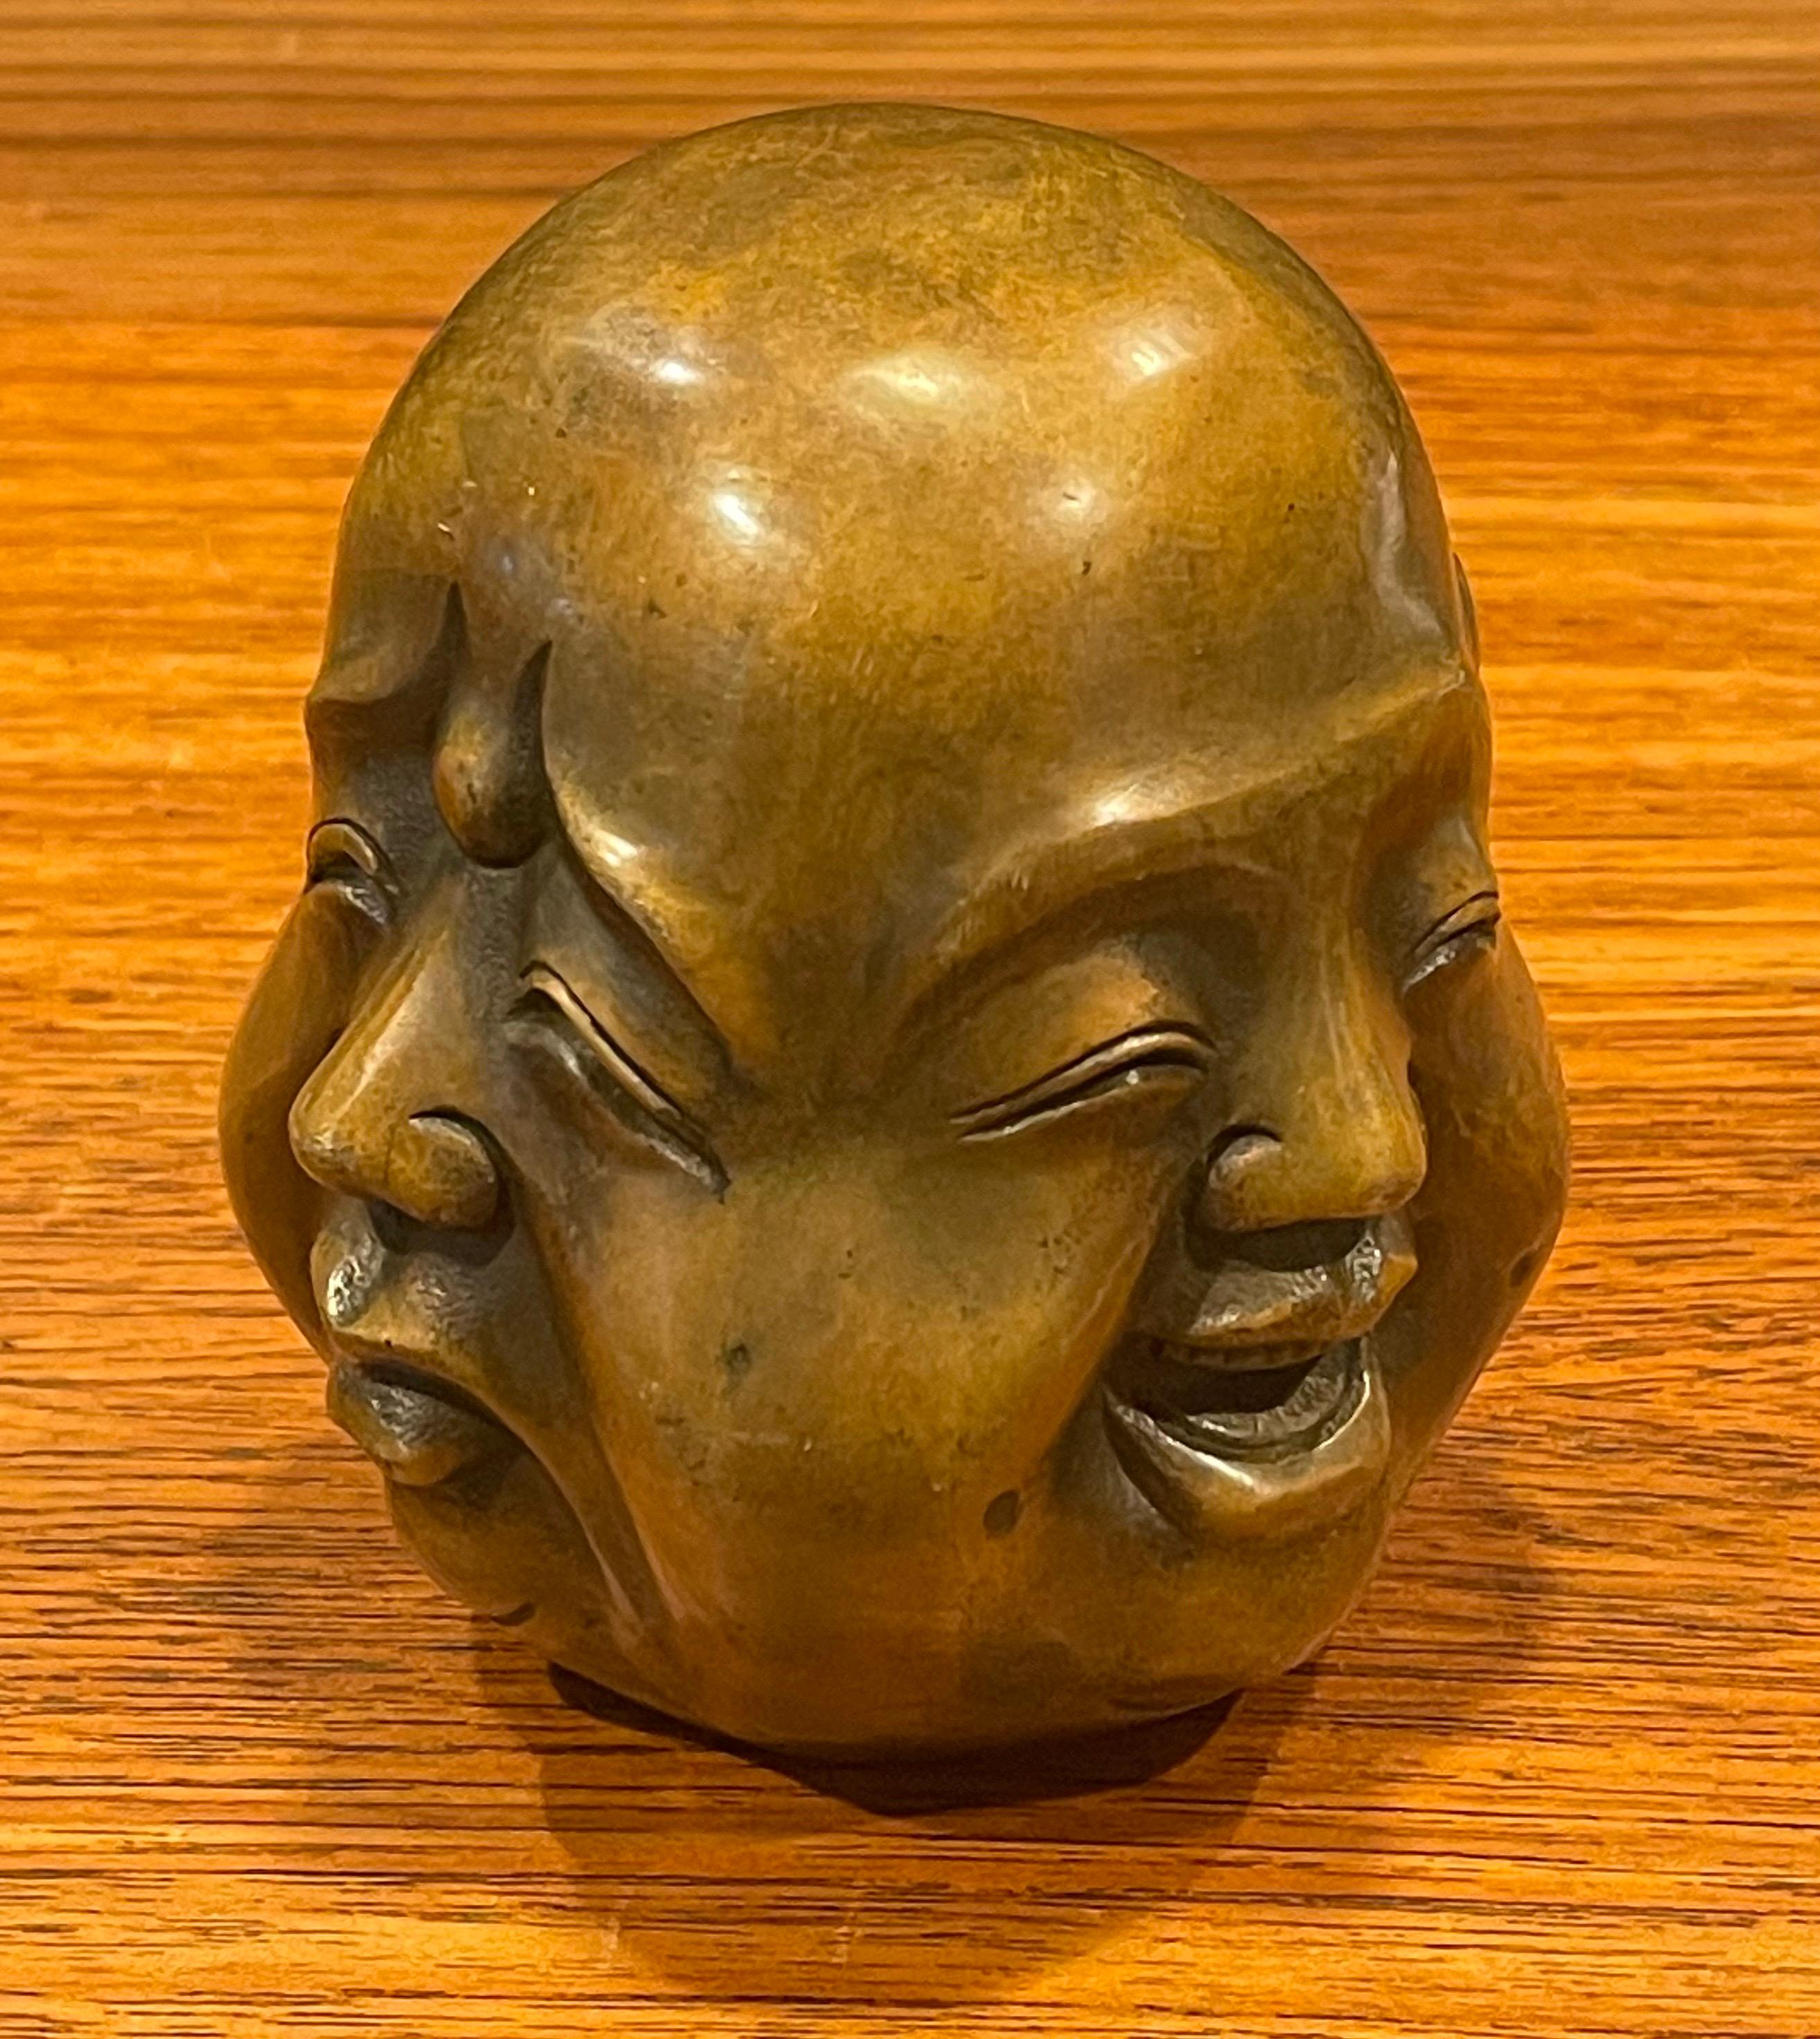 Very cool four faced bronze Buddha head sculpture or paperweight, circa 1960s. The piece is in very good vintage condition and measures: 4